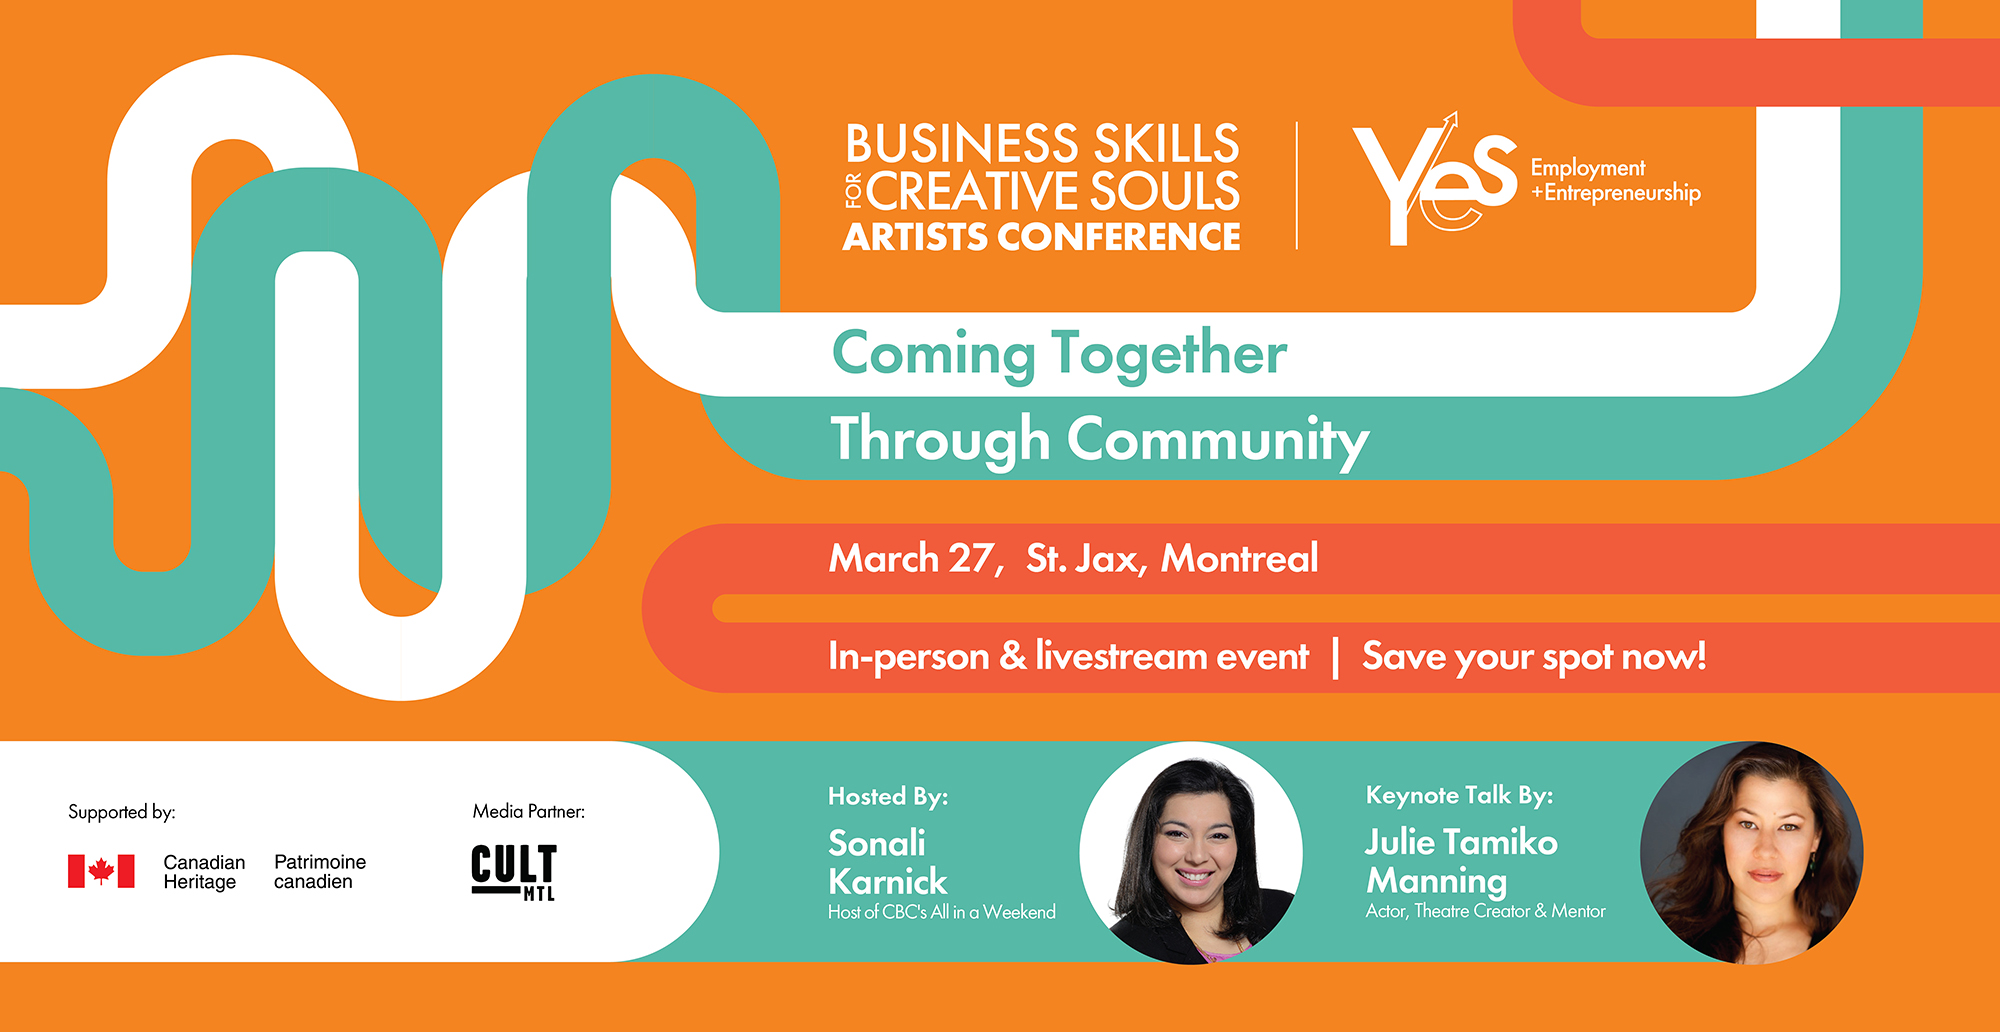 NEW! Business Skills for Creative Souls Artists Conference: Coming Together Through Communit